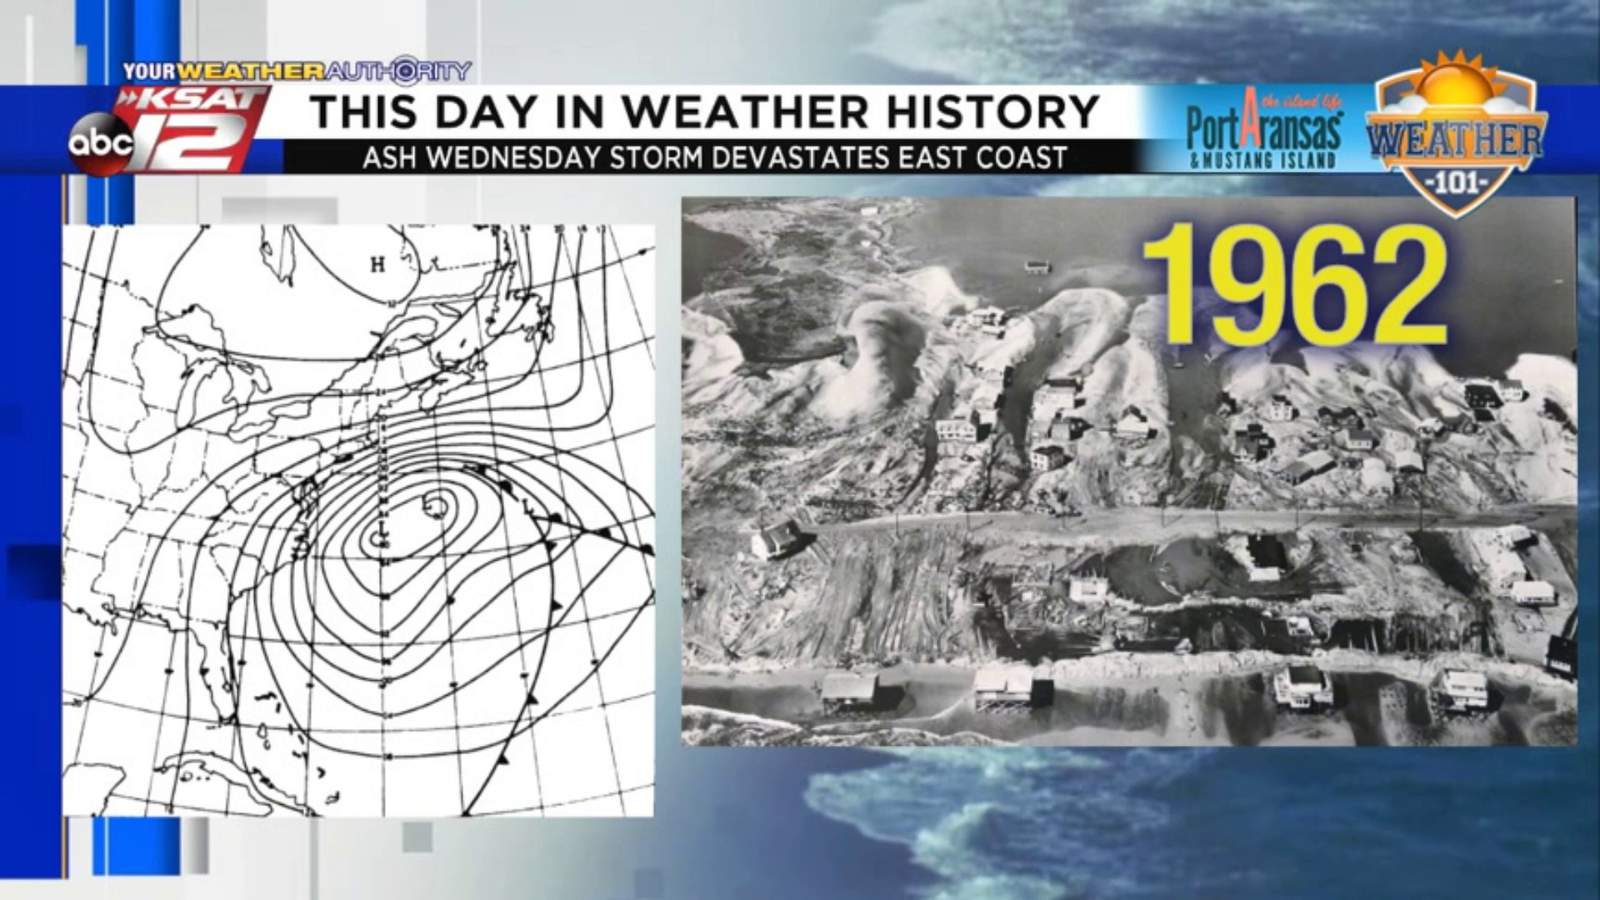 This Day in Weather History: March 6th